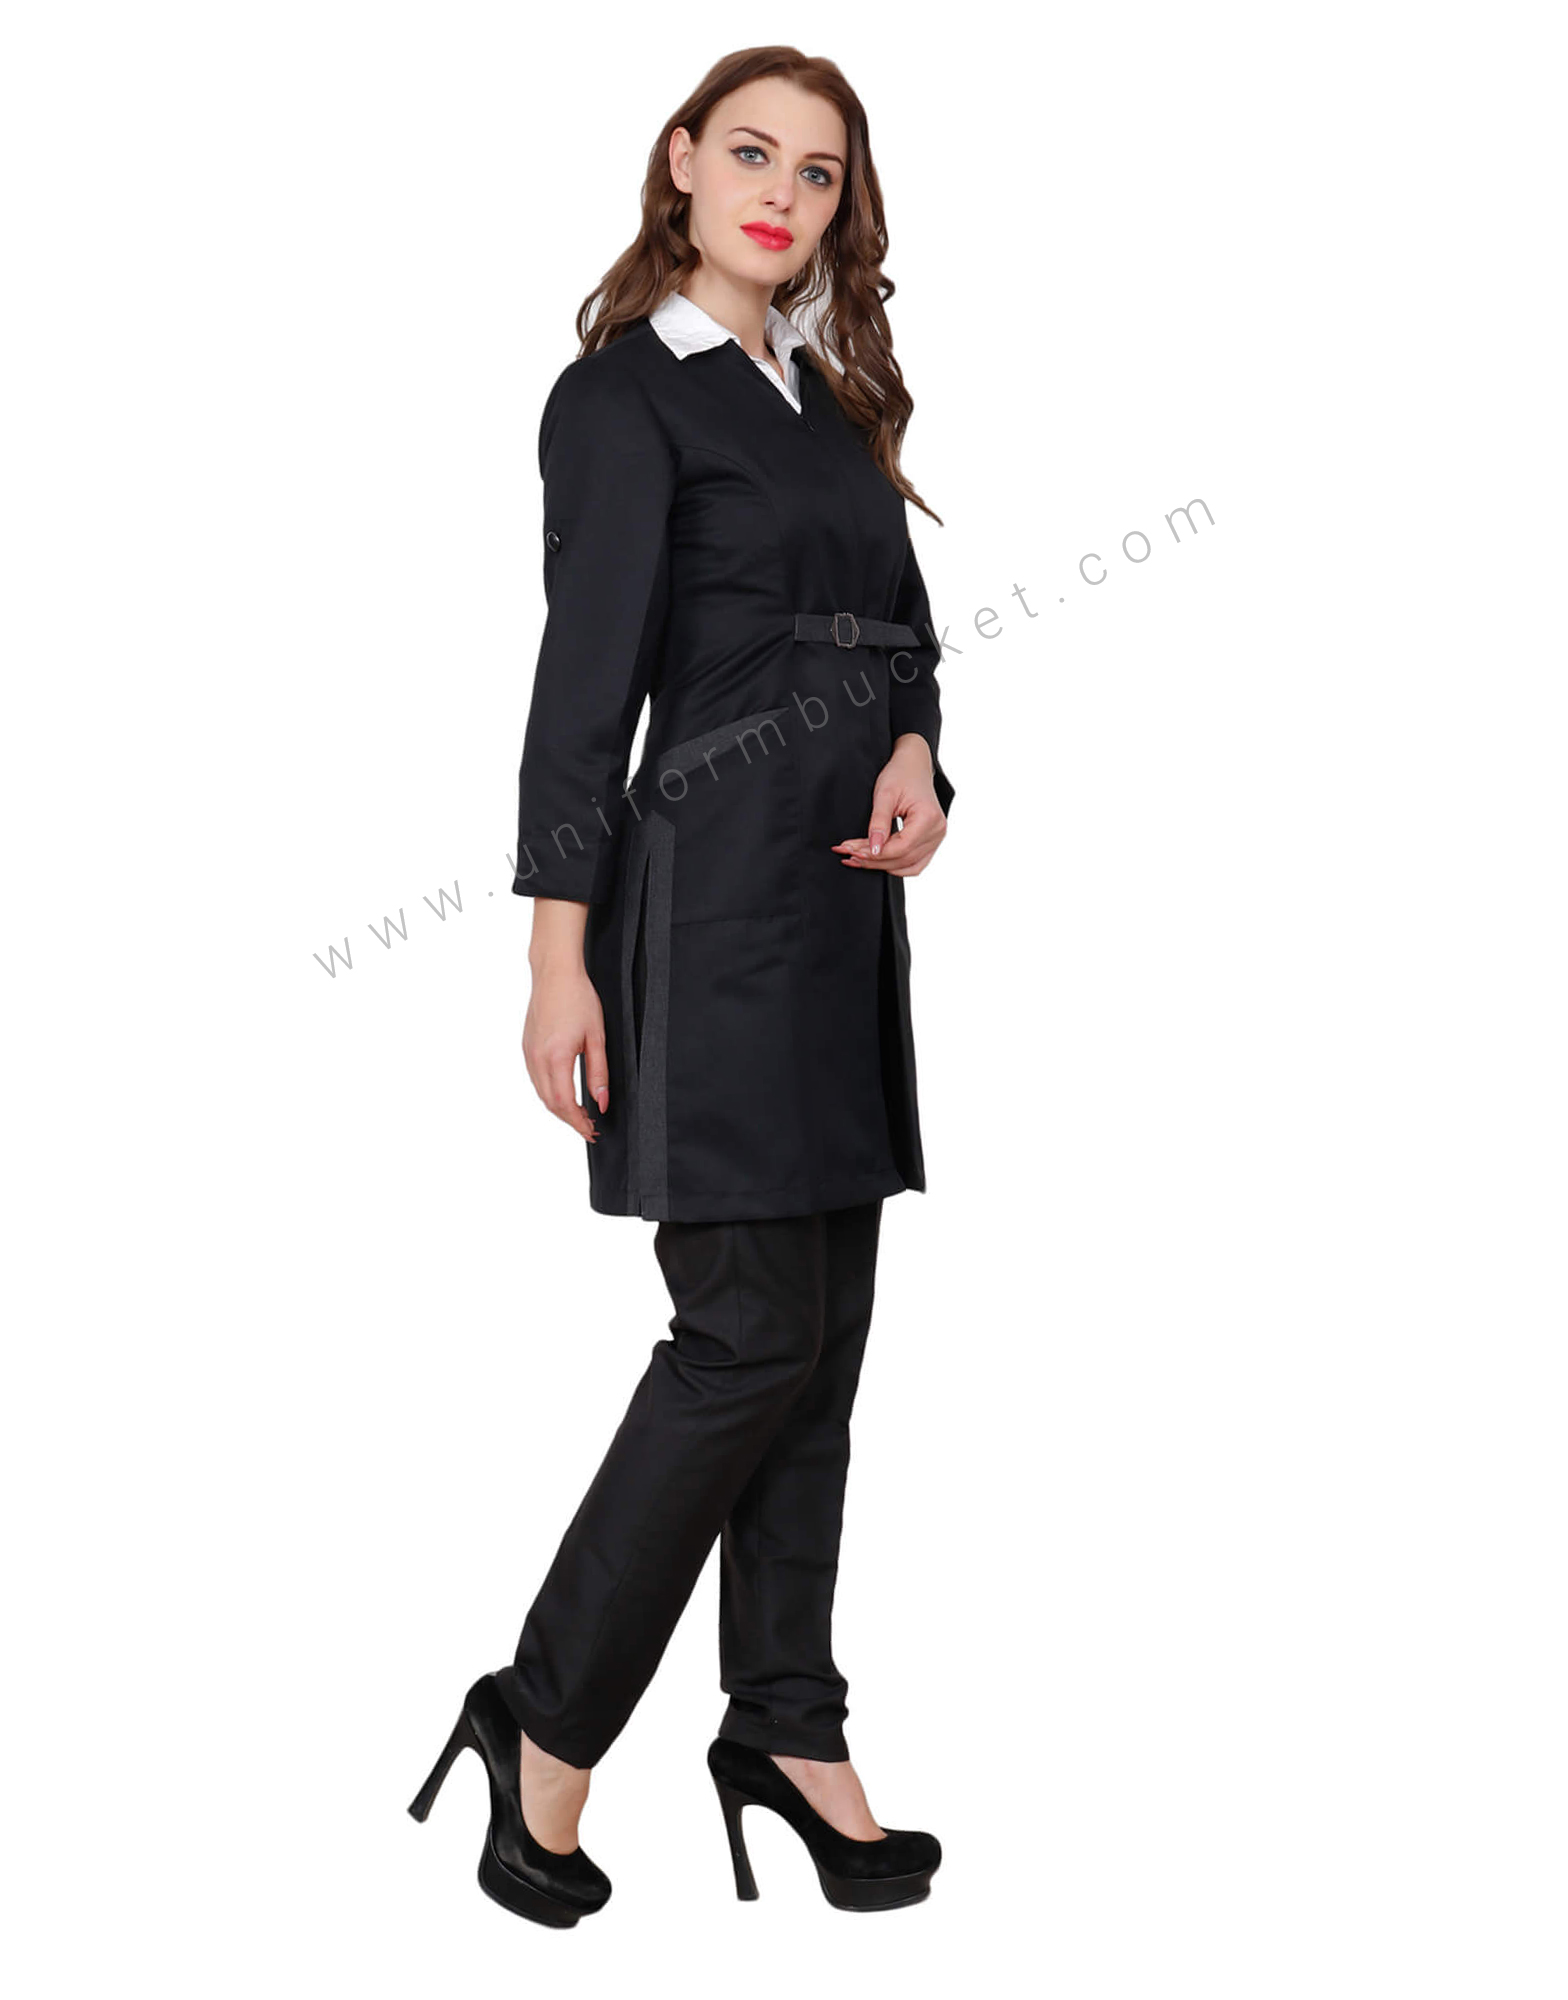 Black Tunic With Adjuster Loop And Side Pockets